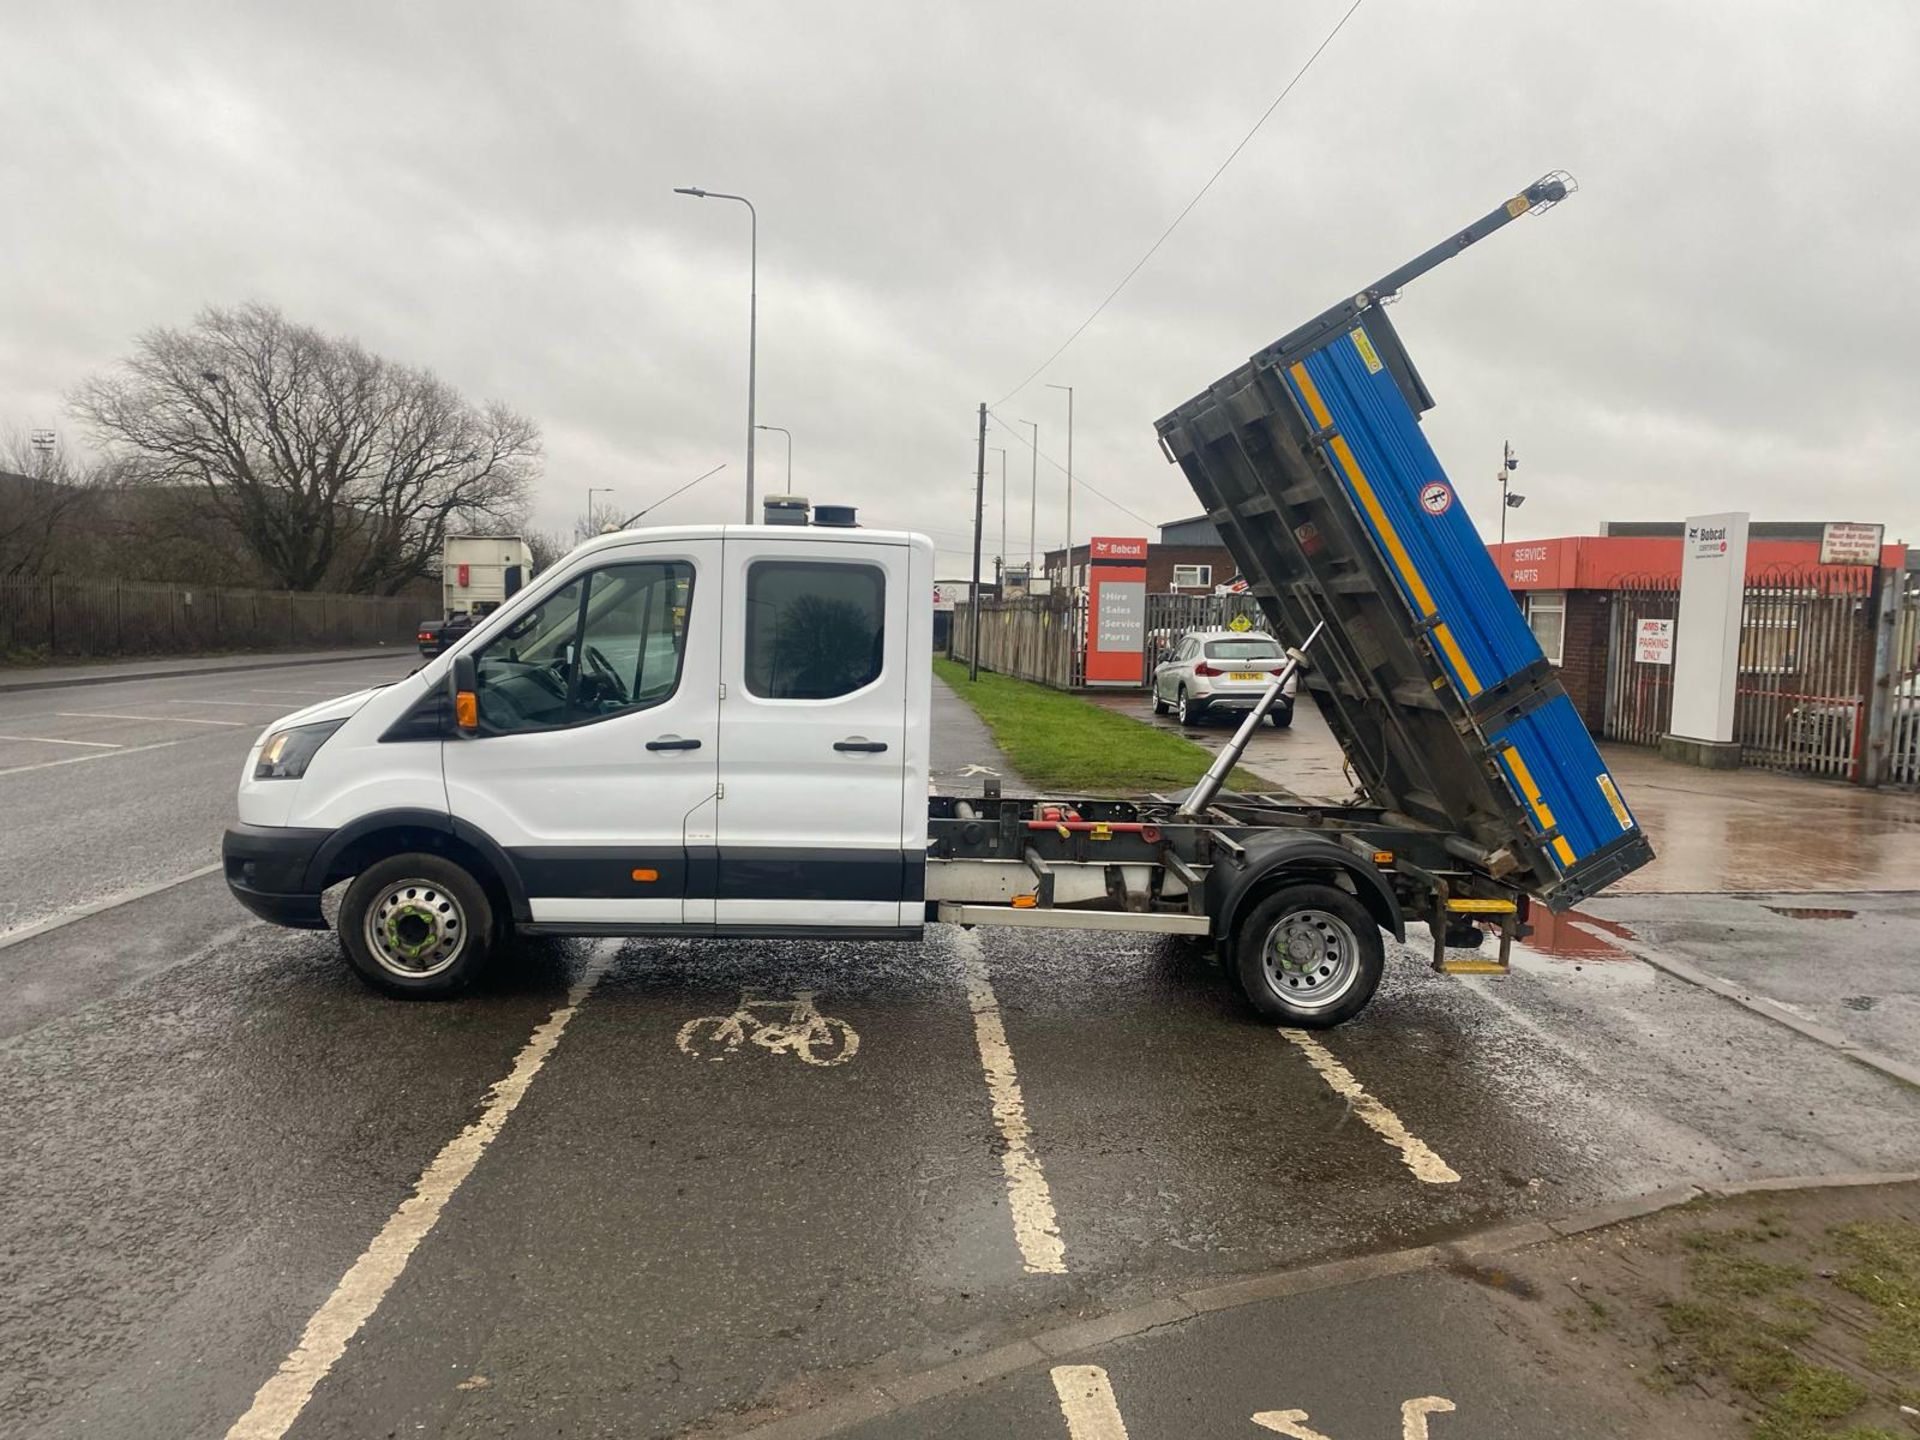 2018 18 FORD TRANSIT 470 TIPPER - 90K MILES - 4.7 TON GROSS - 3 SEATS - RARE TIPPER - TOWBAR. - Image 2 of 15